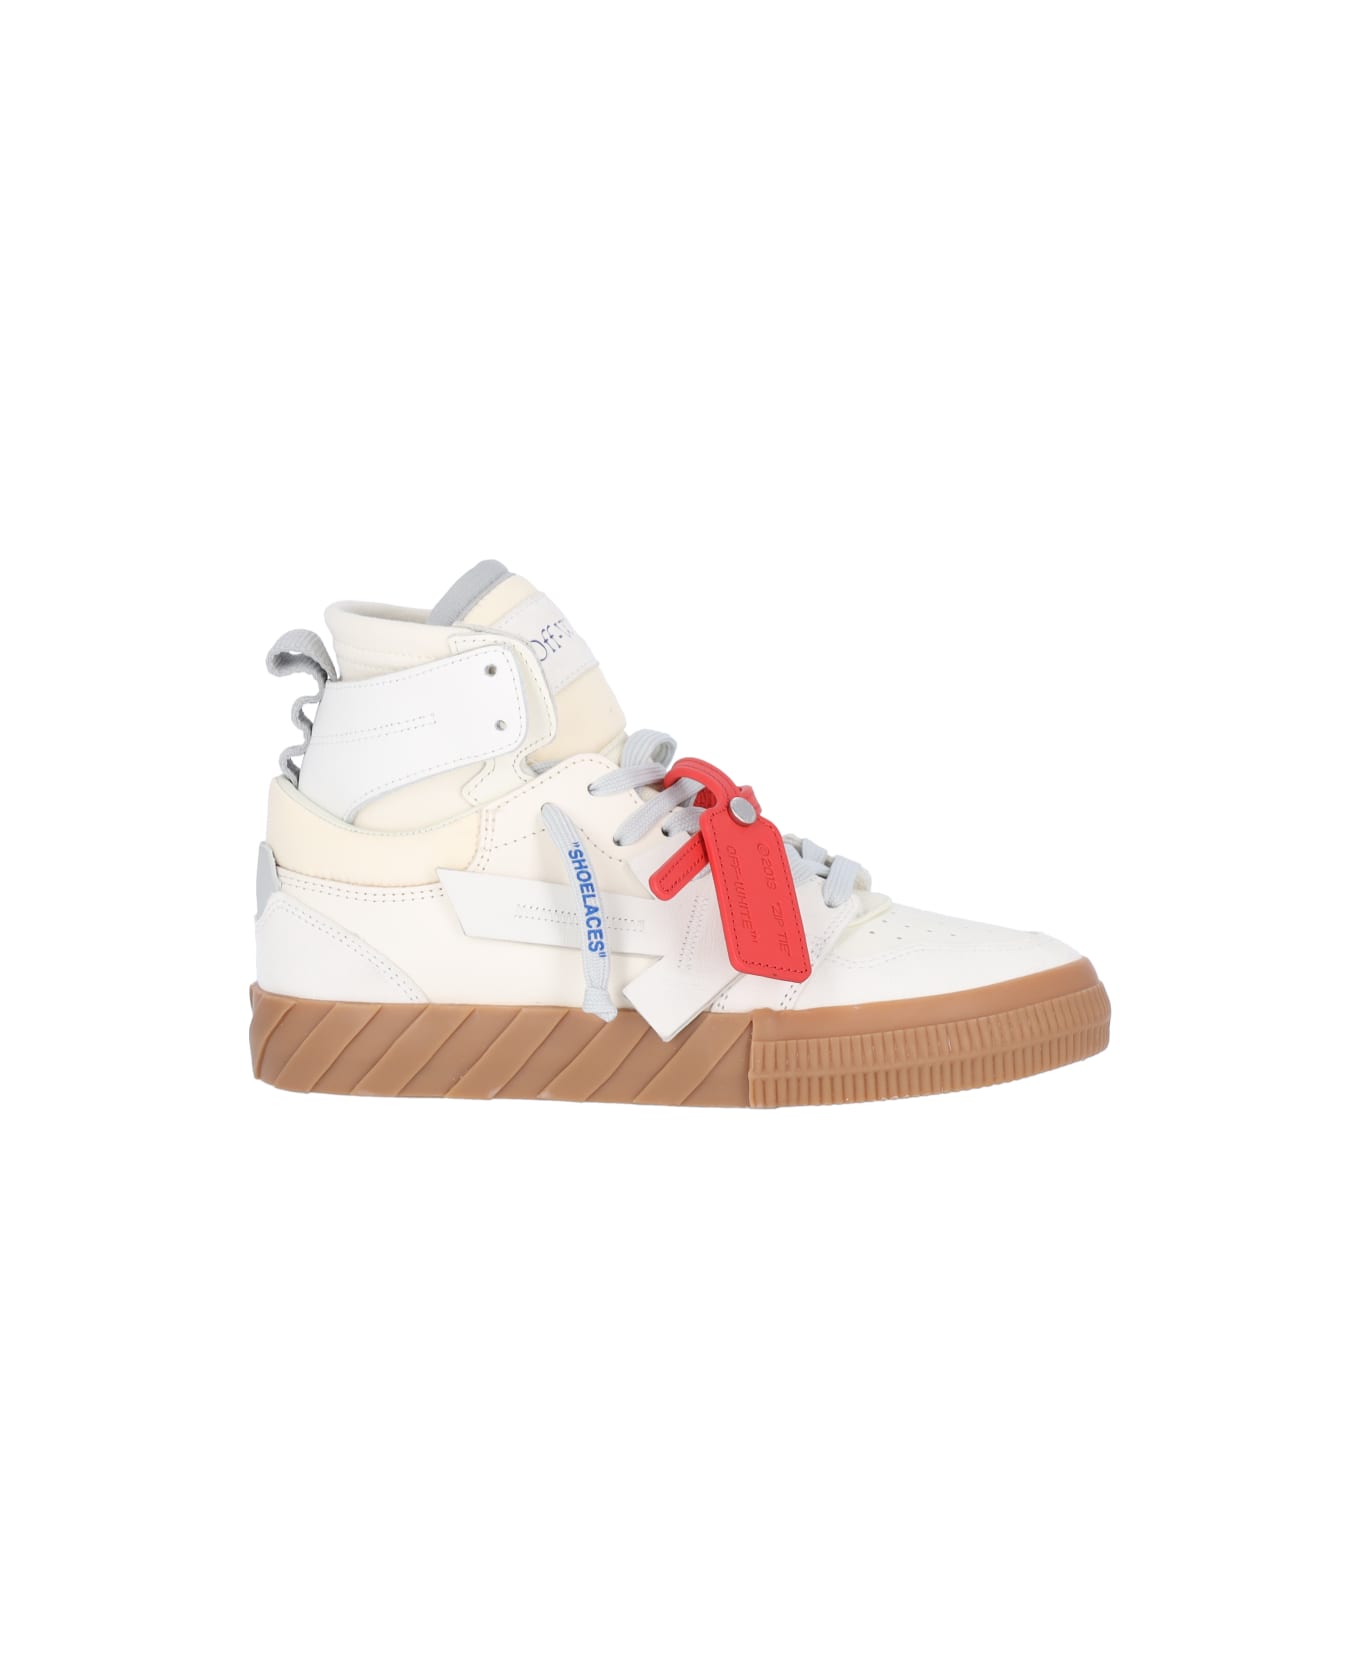 Off-White Floating Arrow High Top Vulcanized Sneakers - Cream